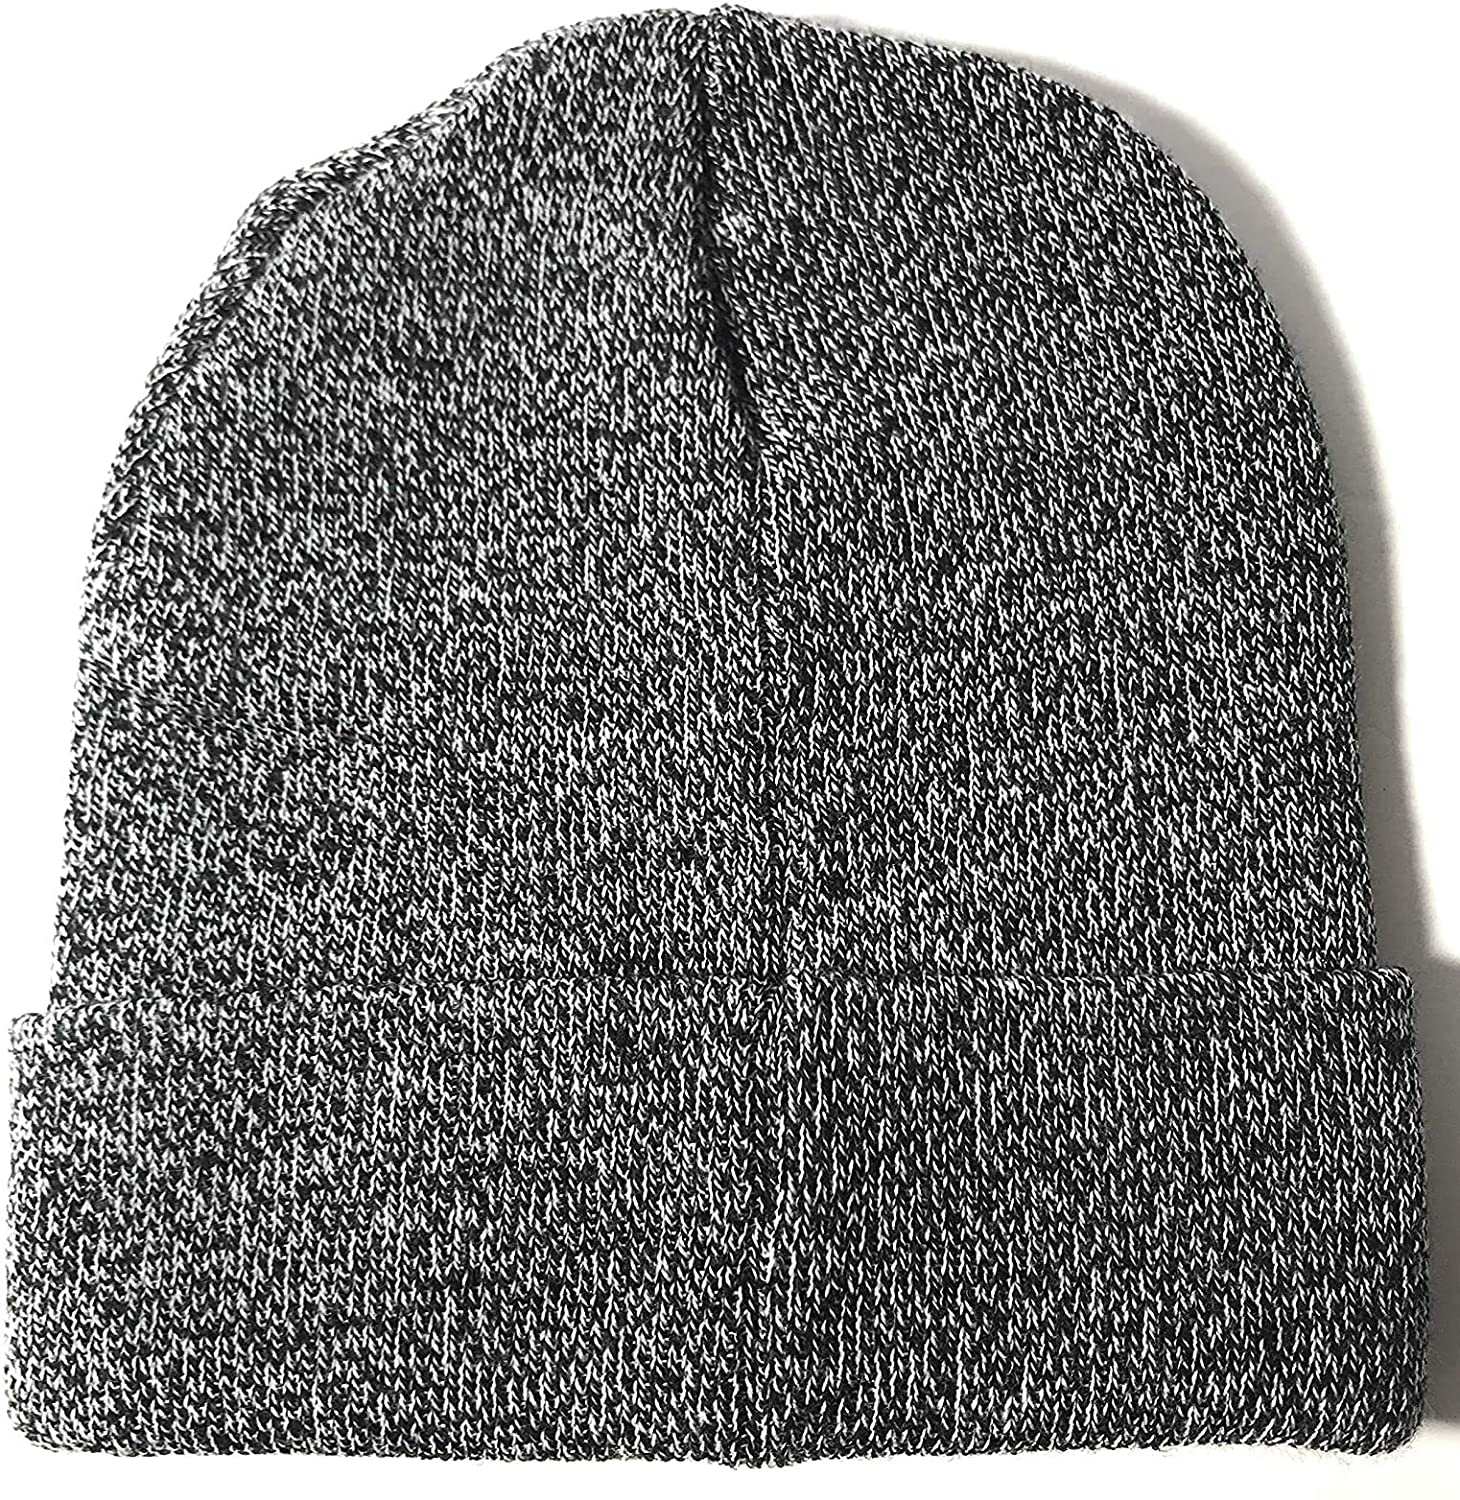 TOPONE ACCESSORIES LIMITED Custom Acrylic Mixed Colors Ribbed Marled Cuff Beanie Hat Topone Accessories Ltd. 